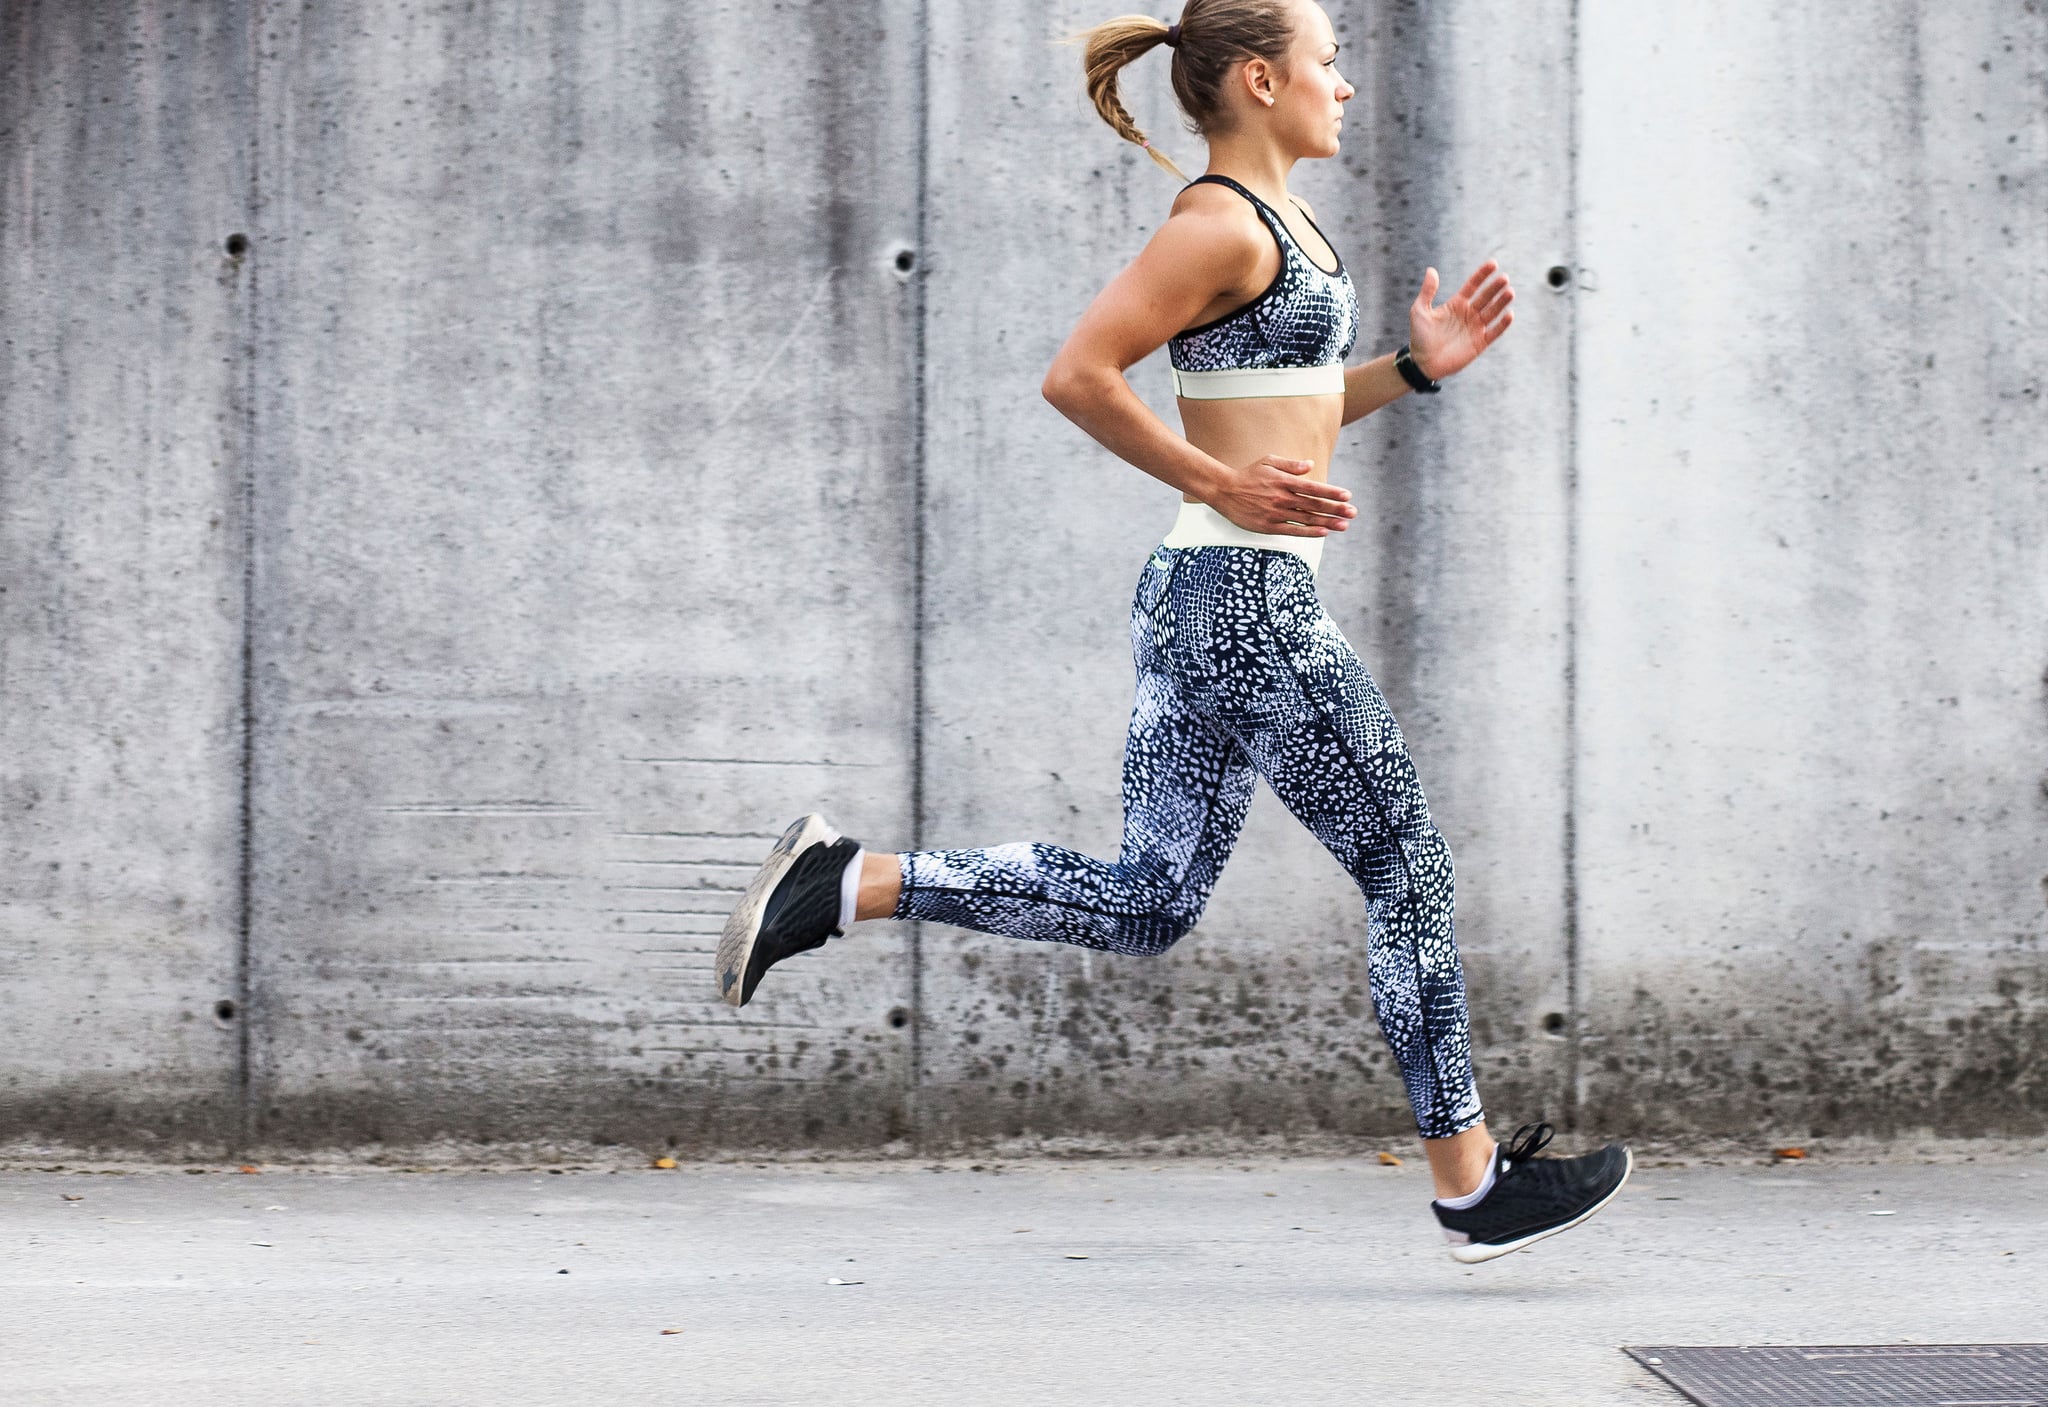 40-Minute HIIT Running Workout